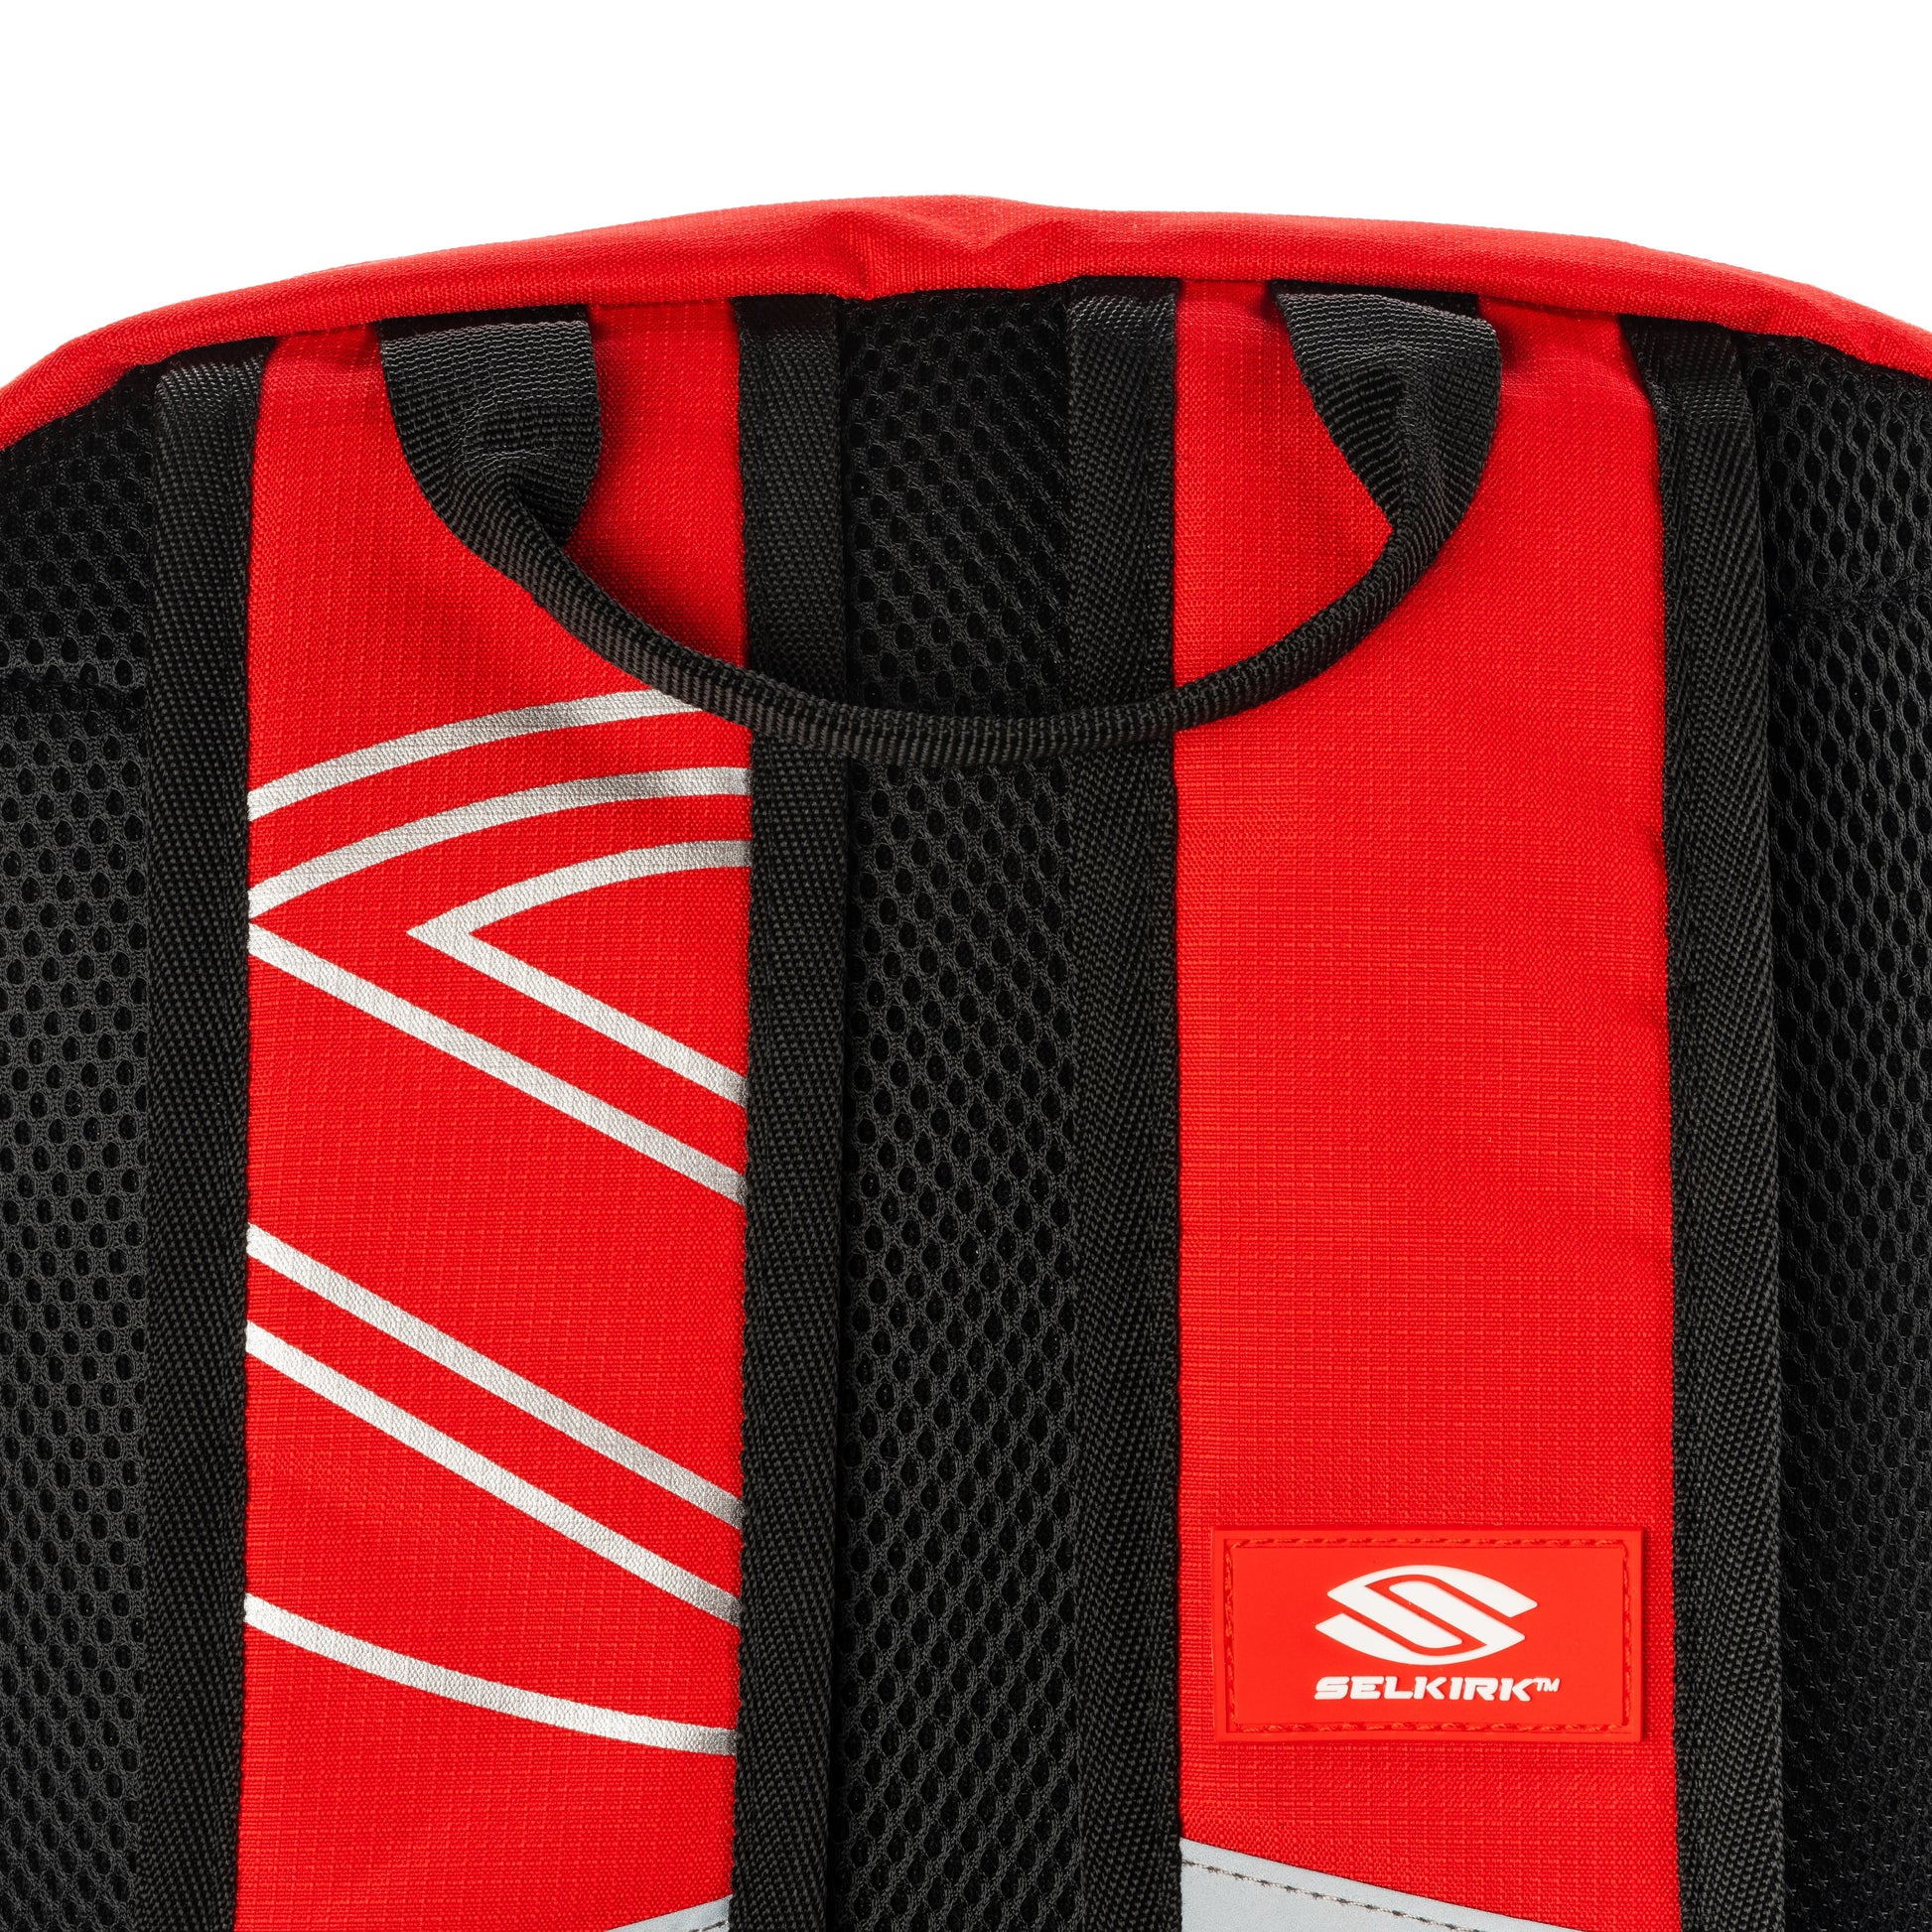 A Selkirk red and black backpack with a logo on it.